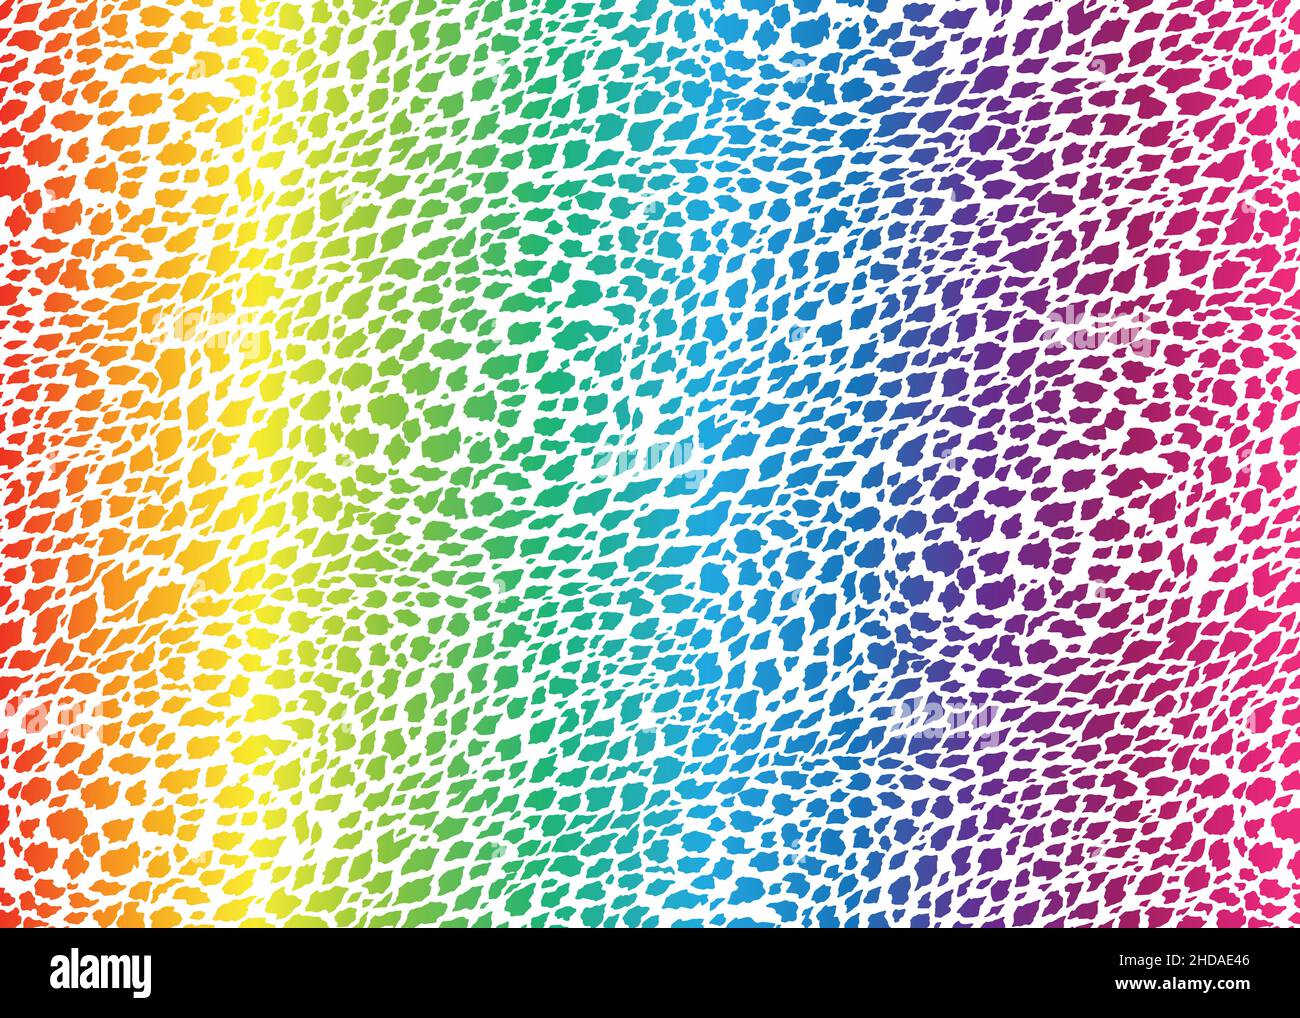 Colorful Cheetah skin pattern design. Vector illustration background. For print, textile, web, home decor, fashion, surface, graphic design Stock Vector